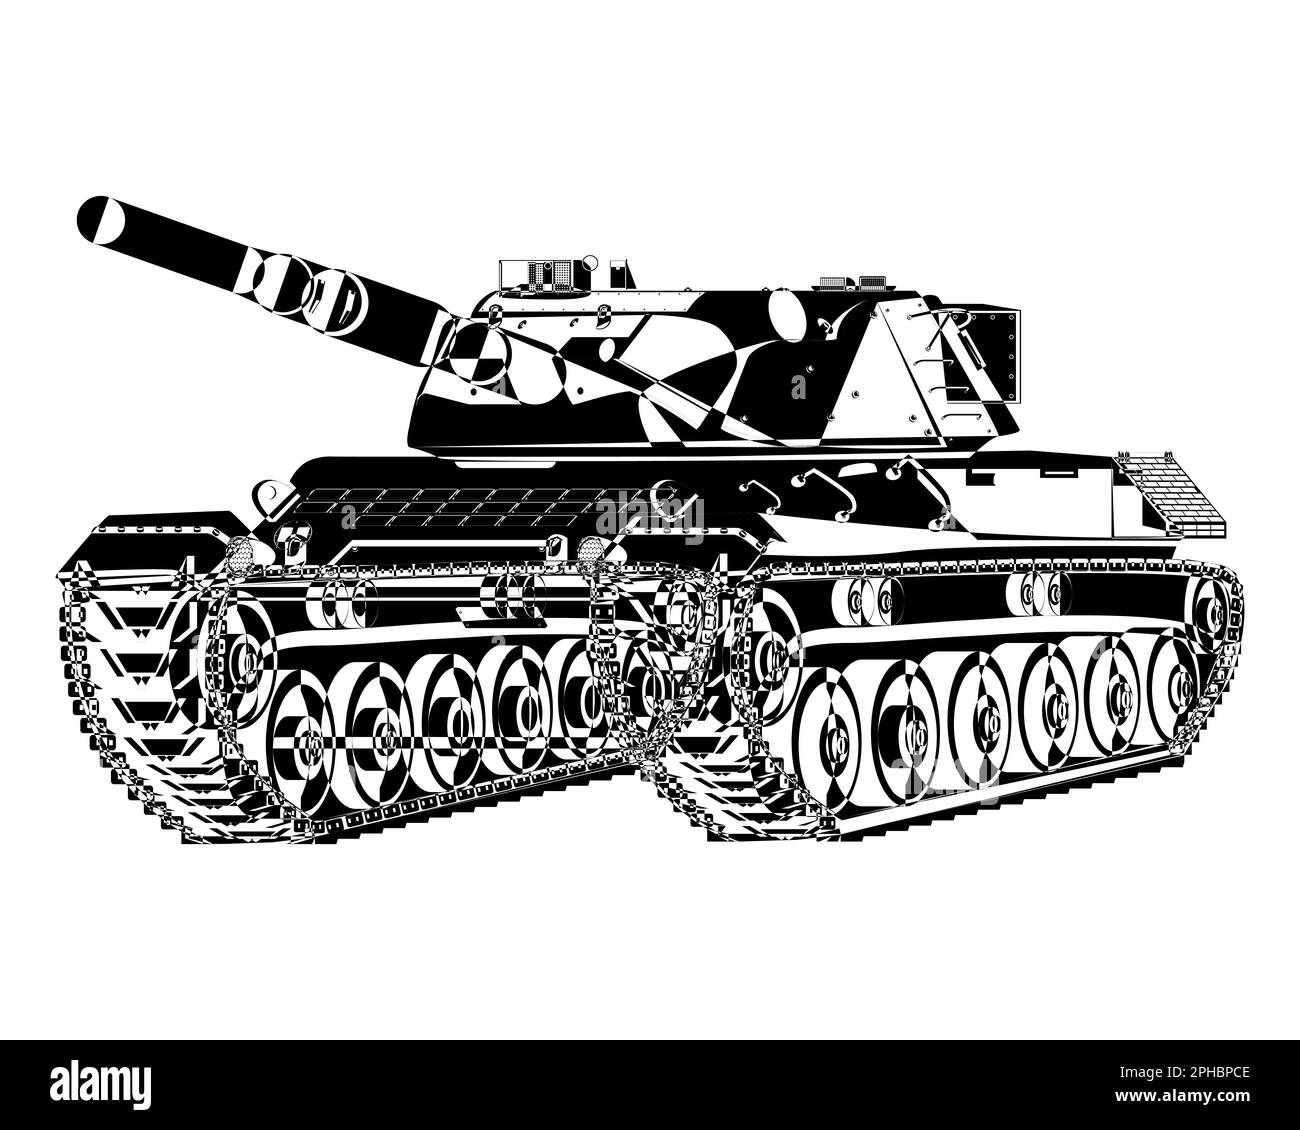 German Leopard I main battle tank in line art style. Military vehicle. Vector illustration isolated on white background. Stock Vector